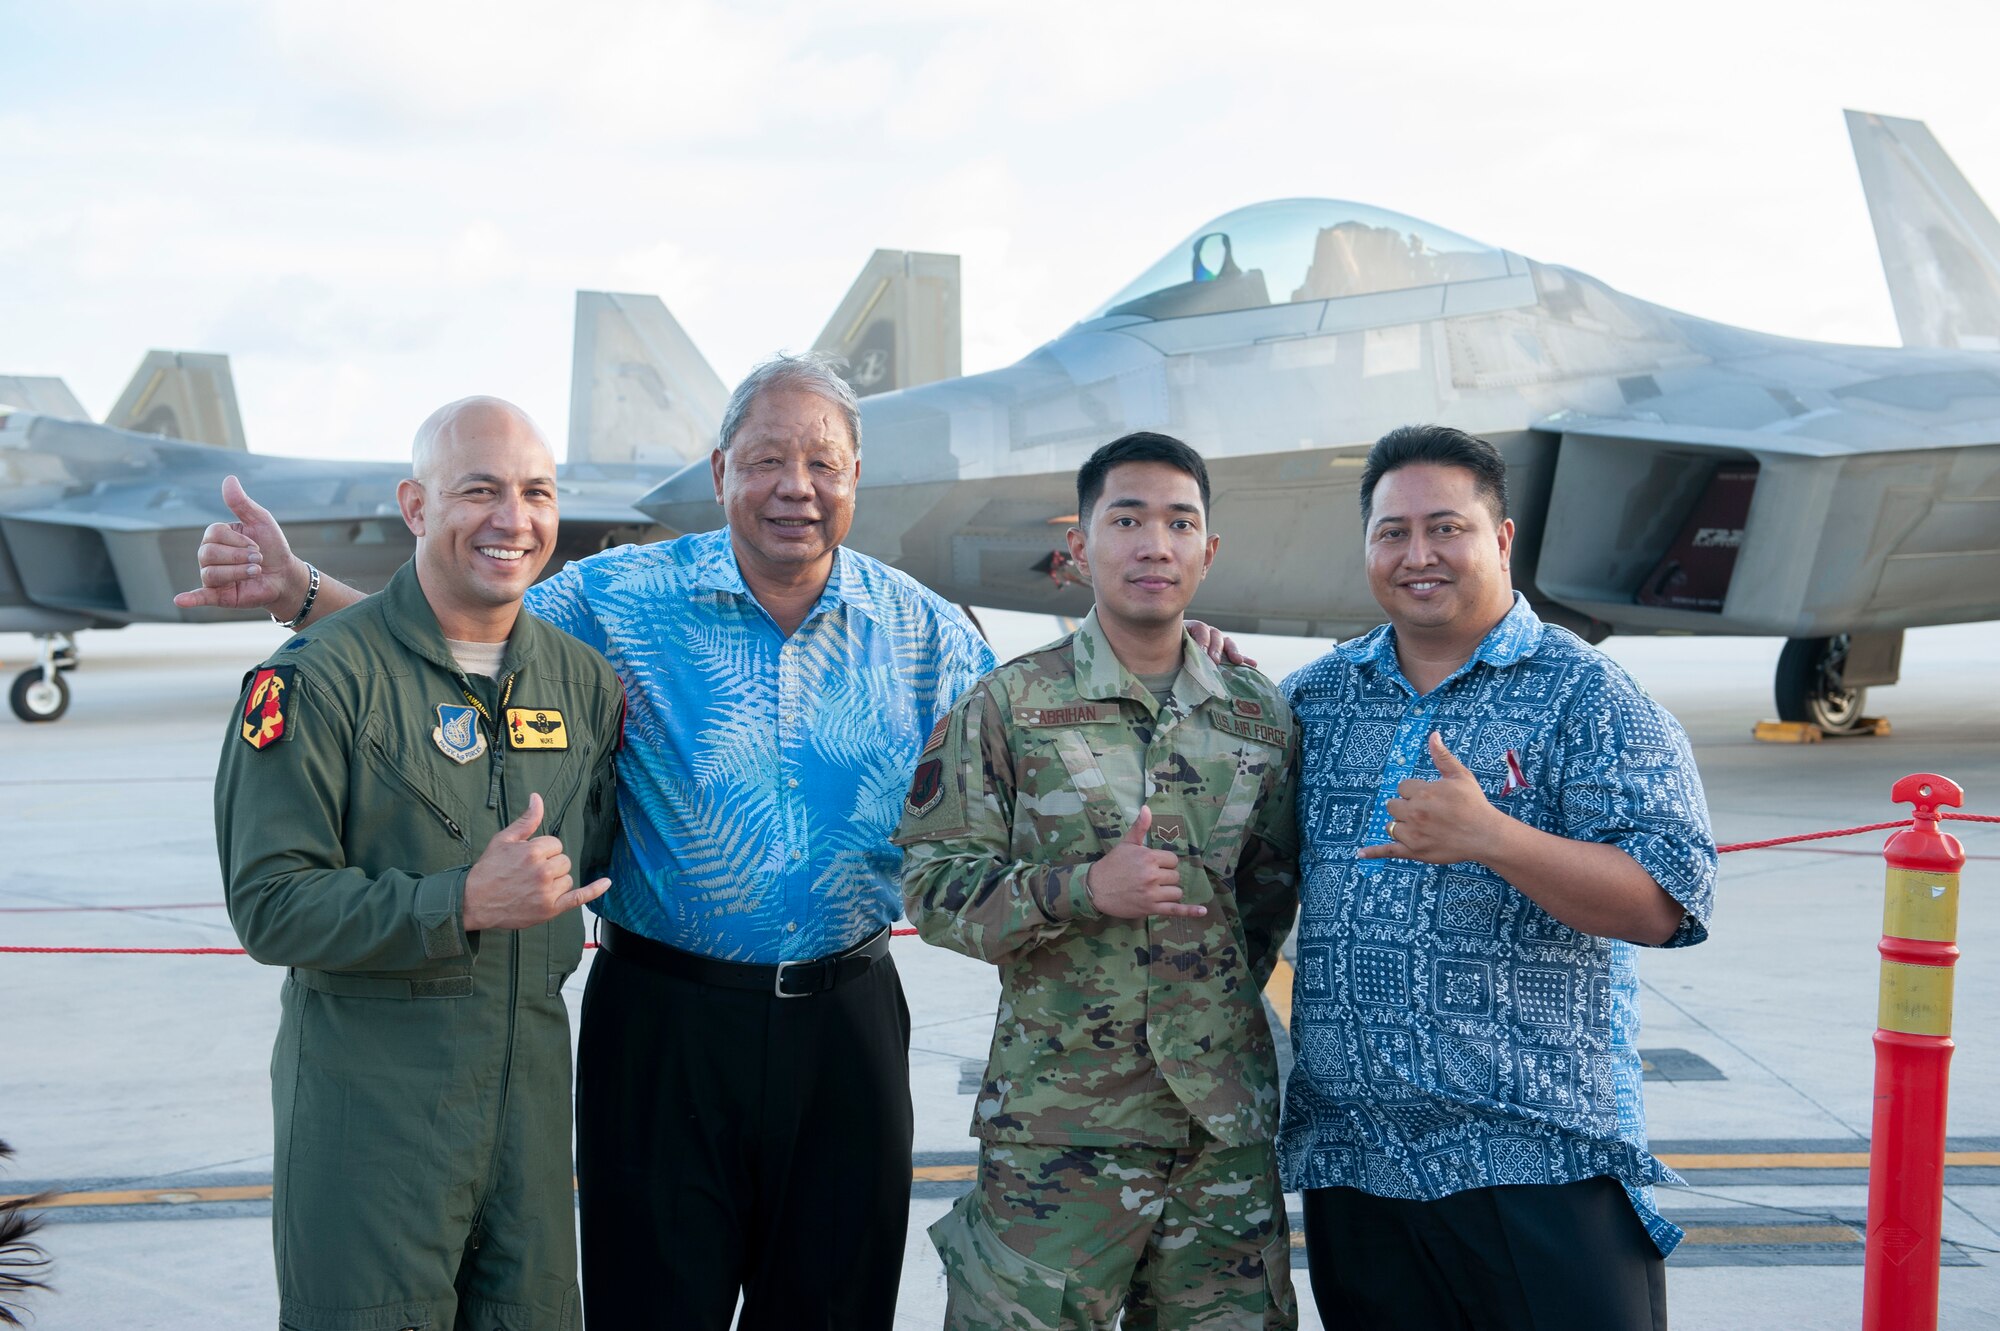 Lt. Col. Shane Nagatani, 199th Fighter Squadron commander, David M. Apatang, Saipan Mayor, Senior Airman Mark Abriham, 36th Communications Squadron radio technician, and Ralph Torres, Governor of Saipan, gather during an F-22 static display tour April 23, 2019, at the Francisco C. Ada International Airport, Saipan. Abriham, a Saipan native, returned home on military orders and supported the ‘Hawaiian Raptors’ during their inaugural visit to his home island. The movement of F-22 Raptor aircraft was part of the Pacific Air Forces exercise Resilient Typhoon, designed to prepare aircraft and personnel to disperse in the face of inclement weather. (U.S. Air National Guard photo by Senior Airman John Linzmeier)